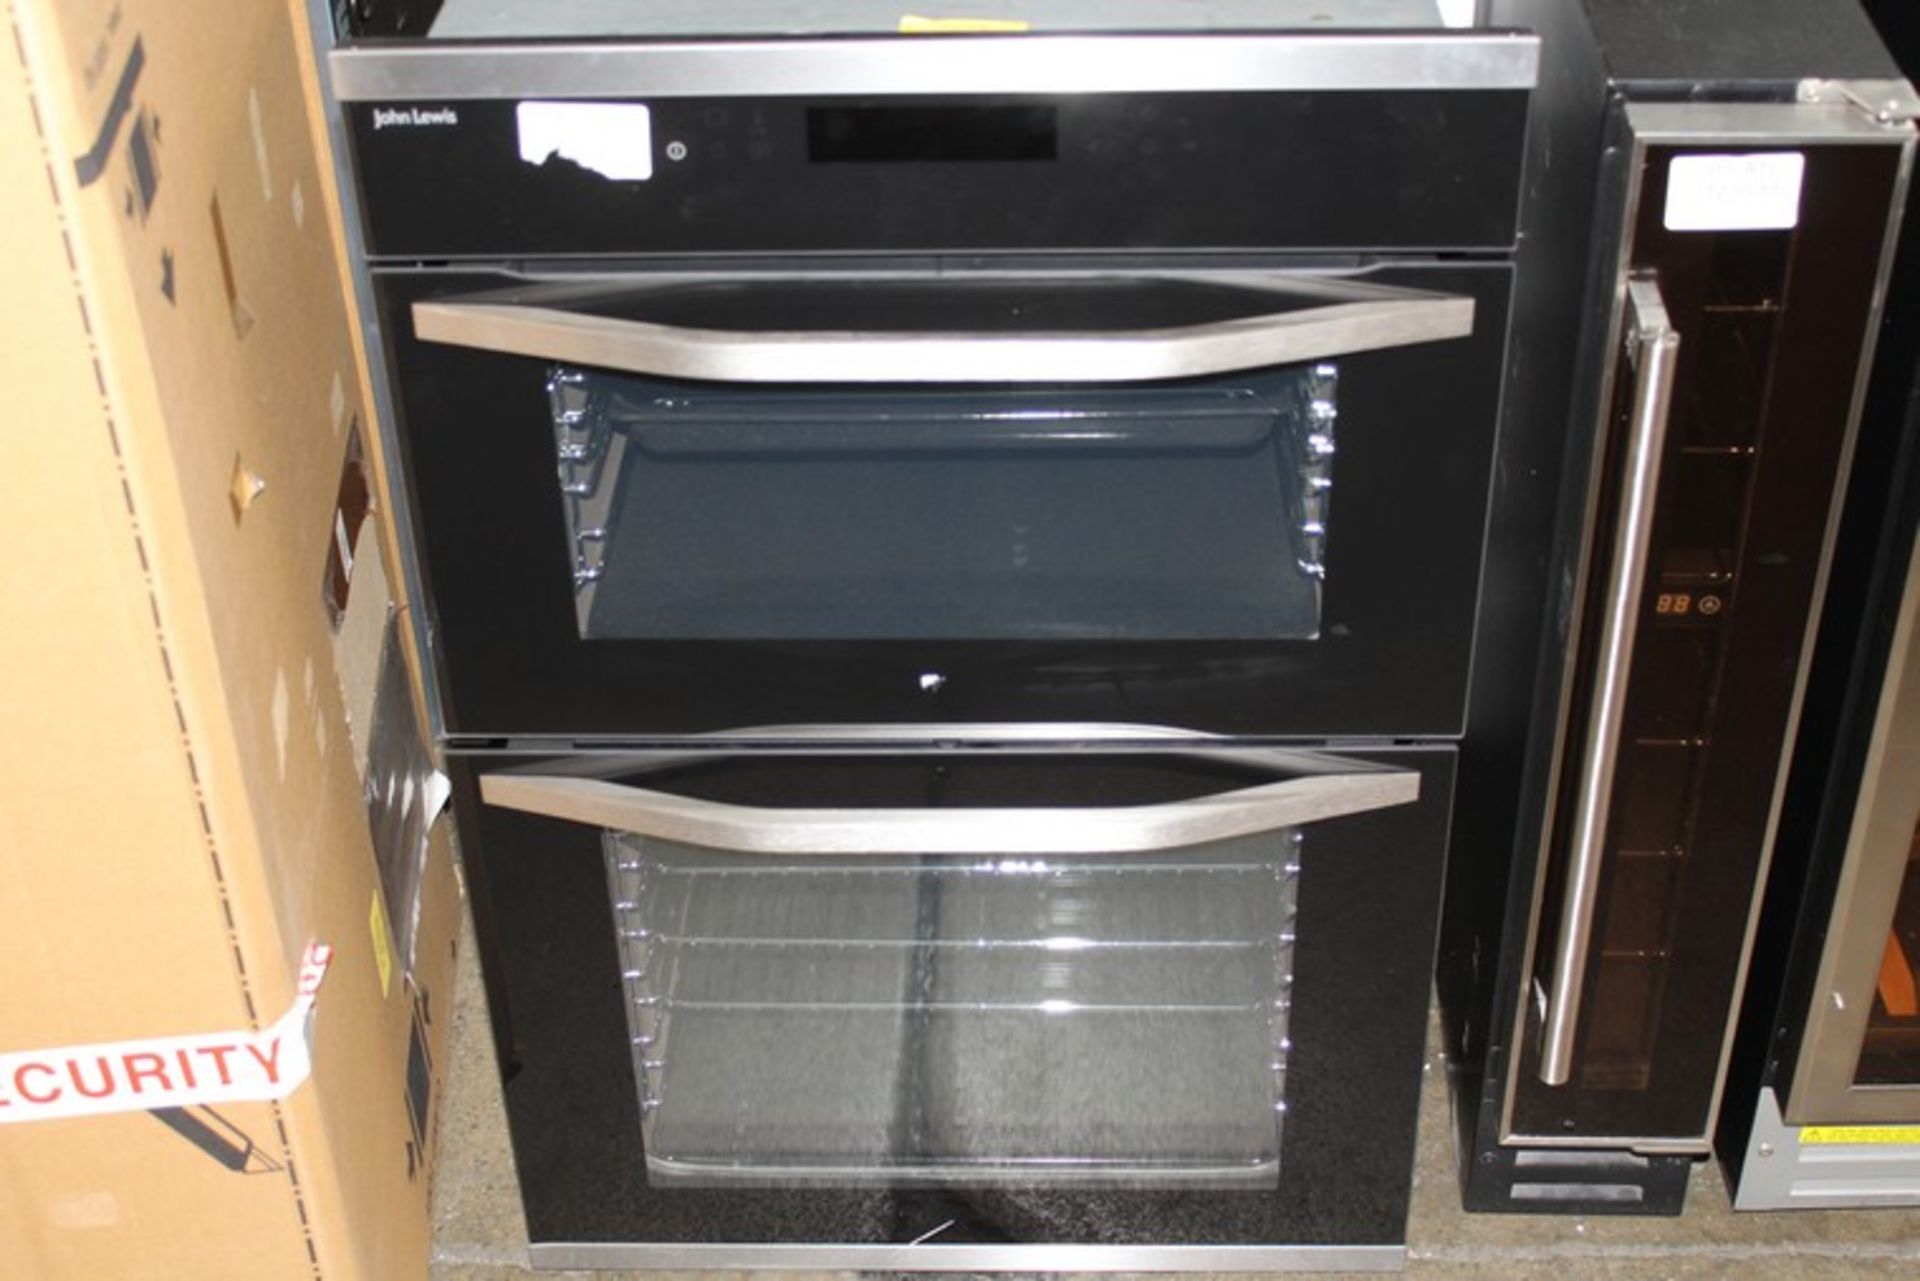 1 x JOHN LEWIS DOUBLE OVEN RRP £400 (30.02.18) *PLEASE NOTE THAT THE BID PRICE IS MULTIPLIED BY